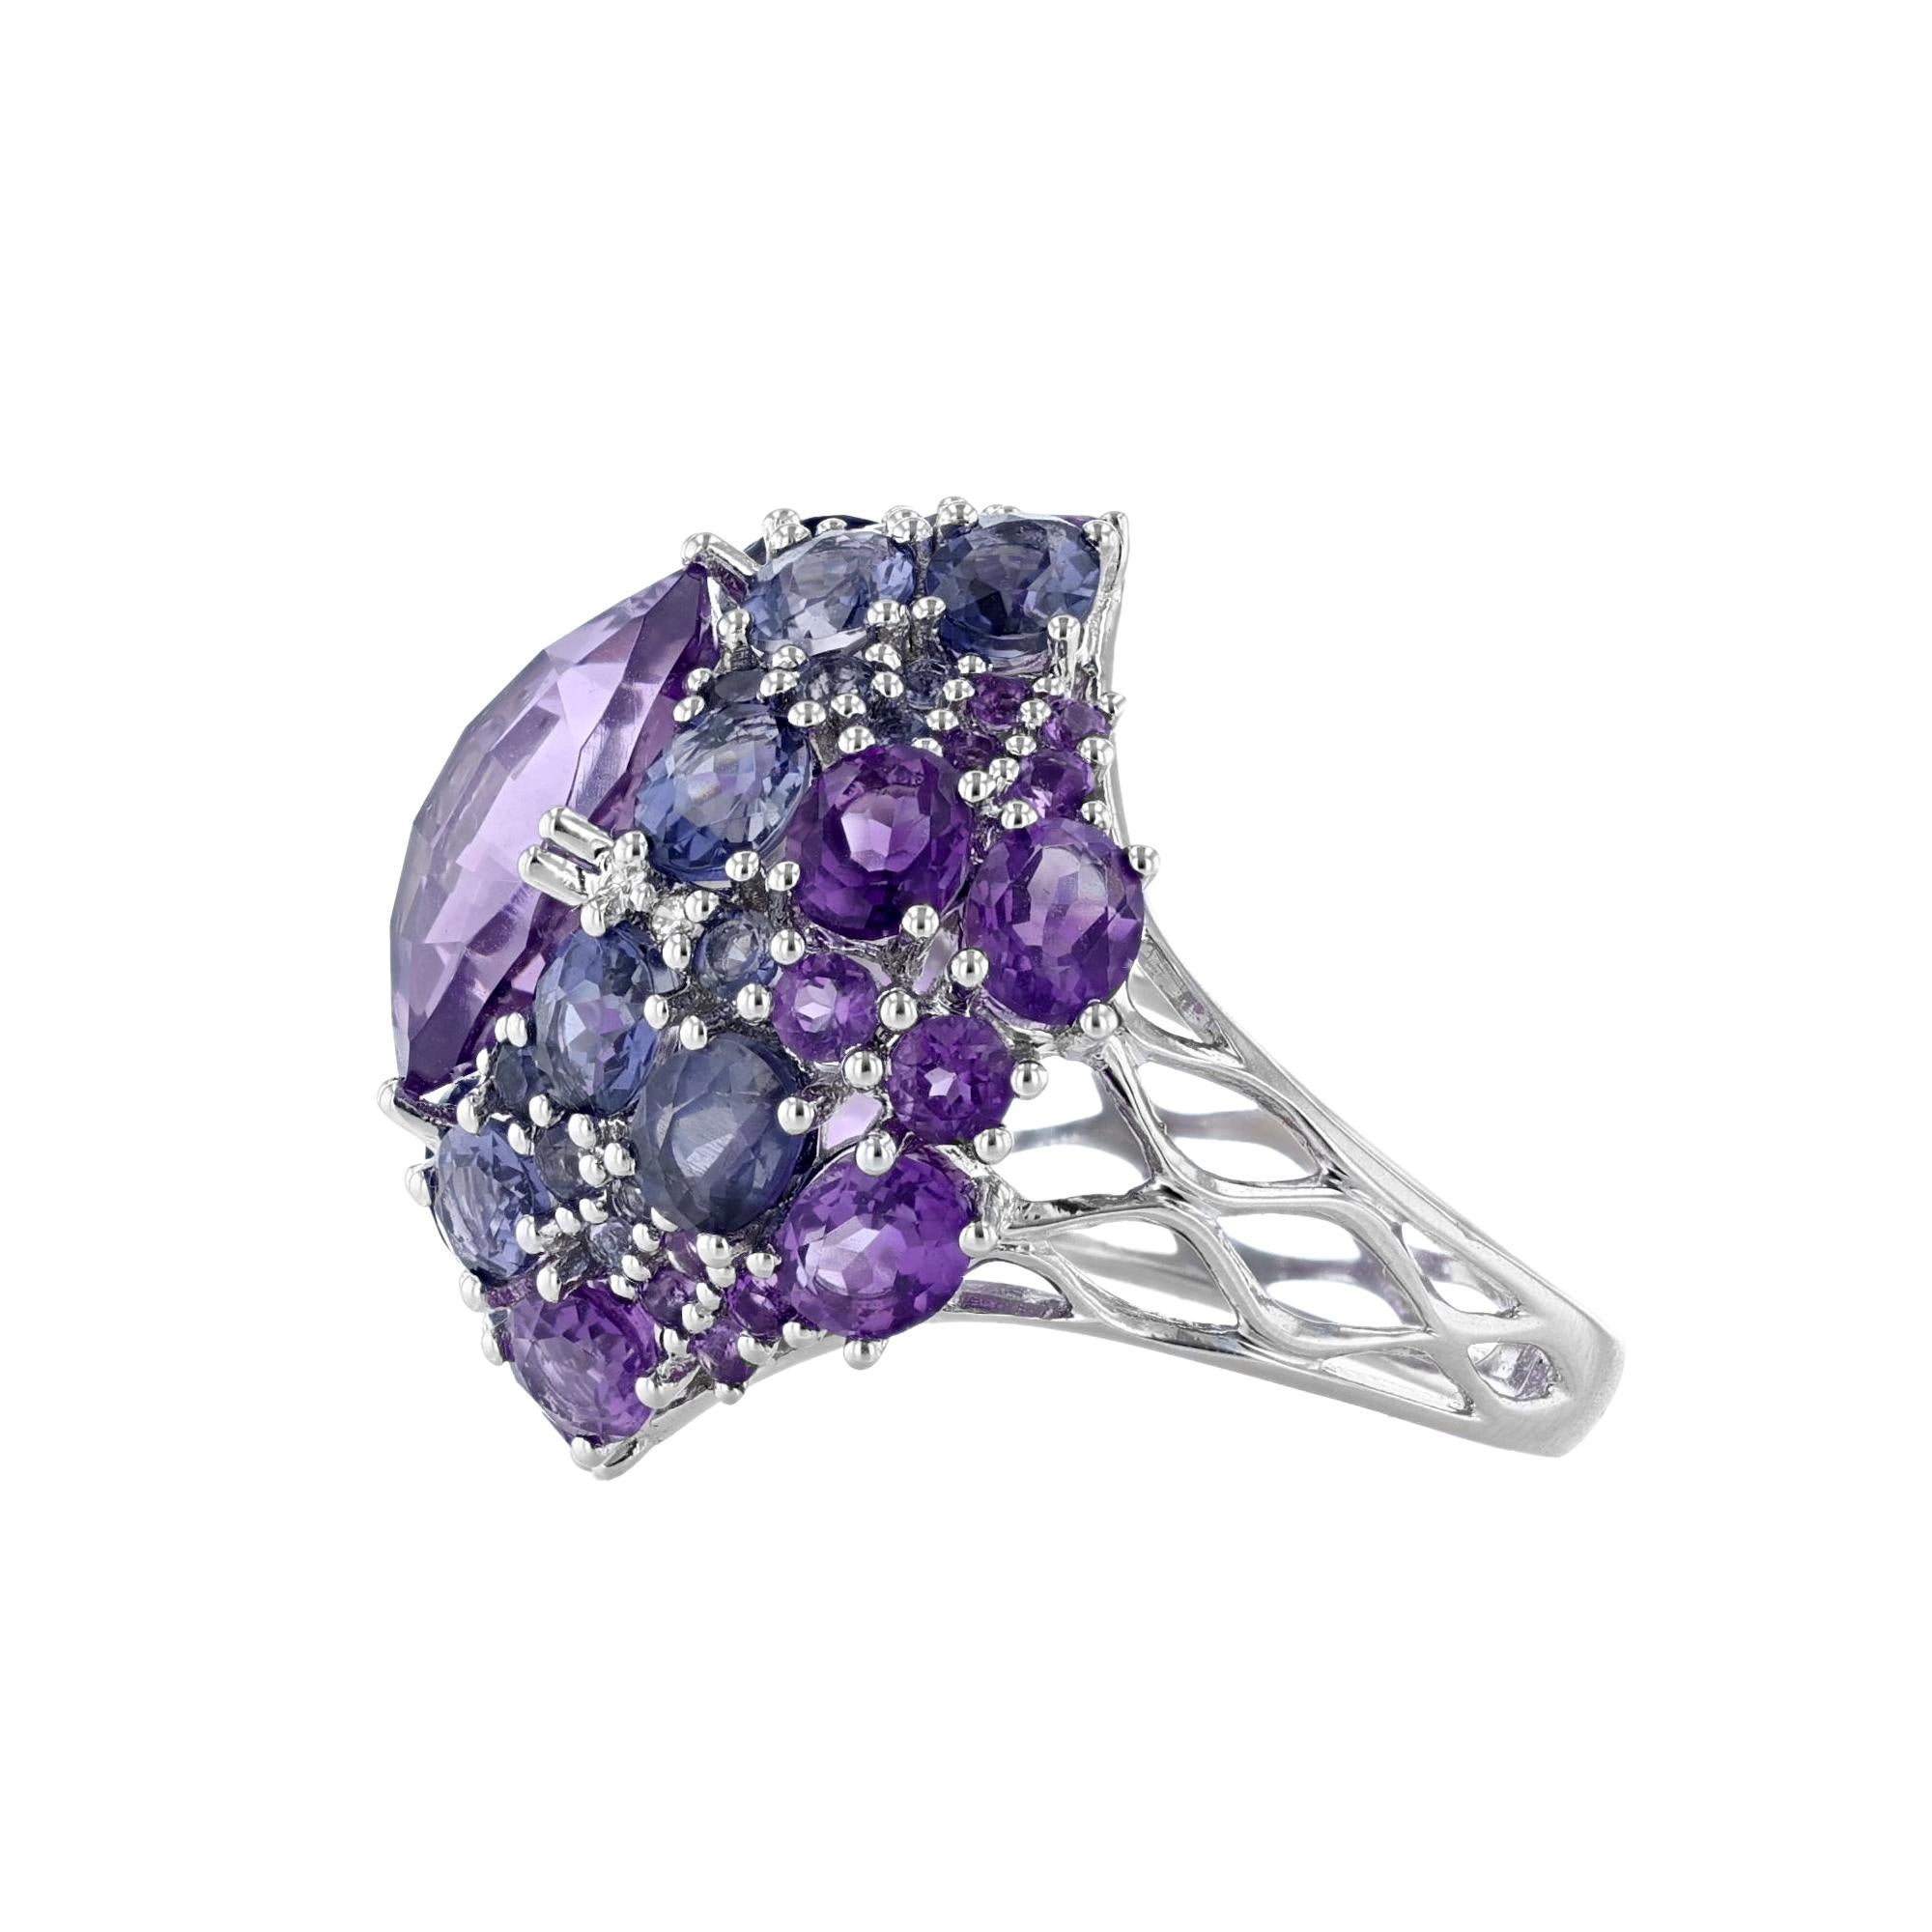 This ring is made in 14K white gold and features amethyst weighing 9.12 carats. Along with Iolite weighing 4.29 carats, and diamonds weighing 0.06 carat.